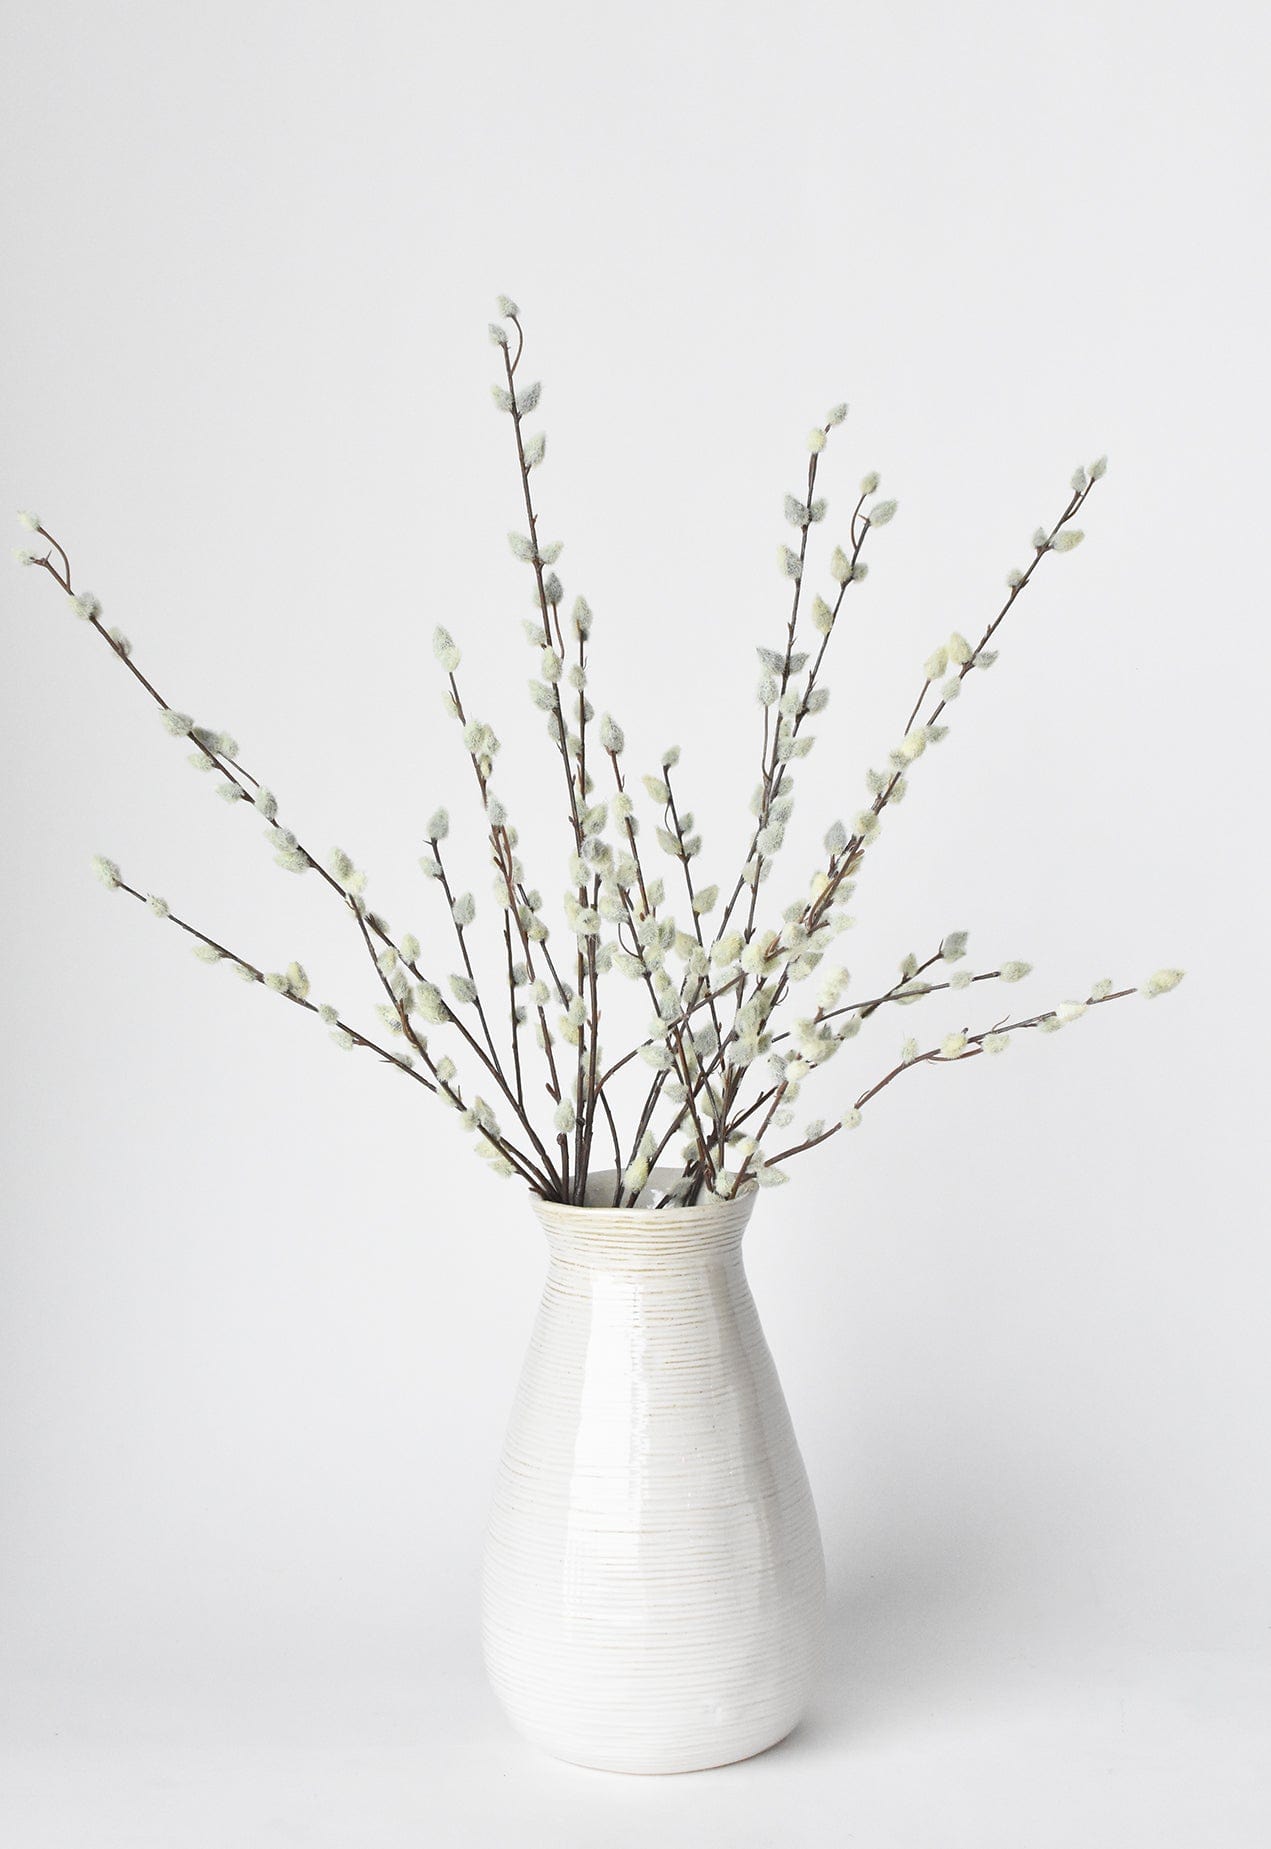 Artificial Pussy Willow Branches 31in (Set of 12)